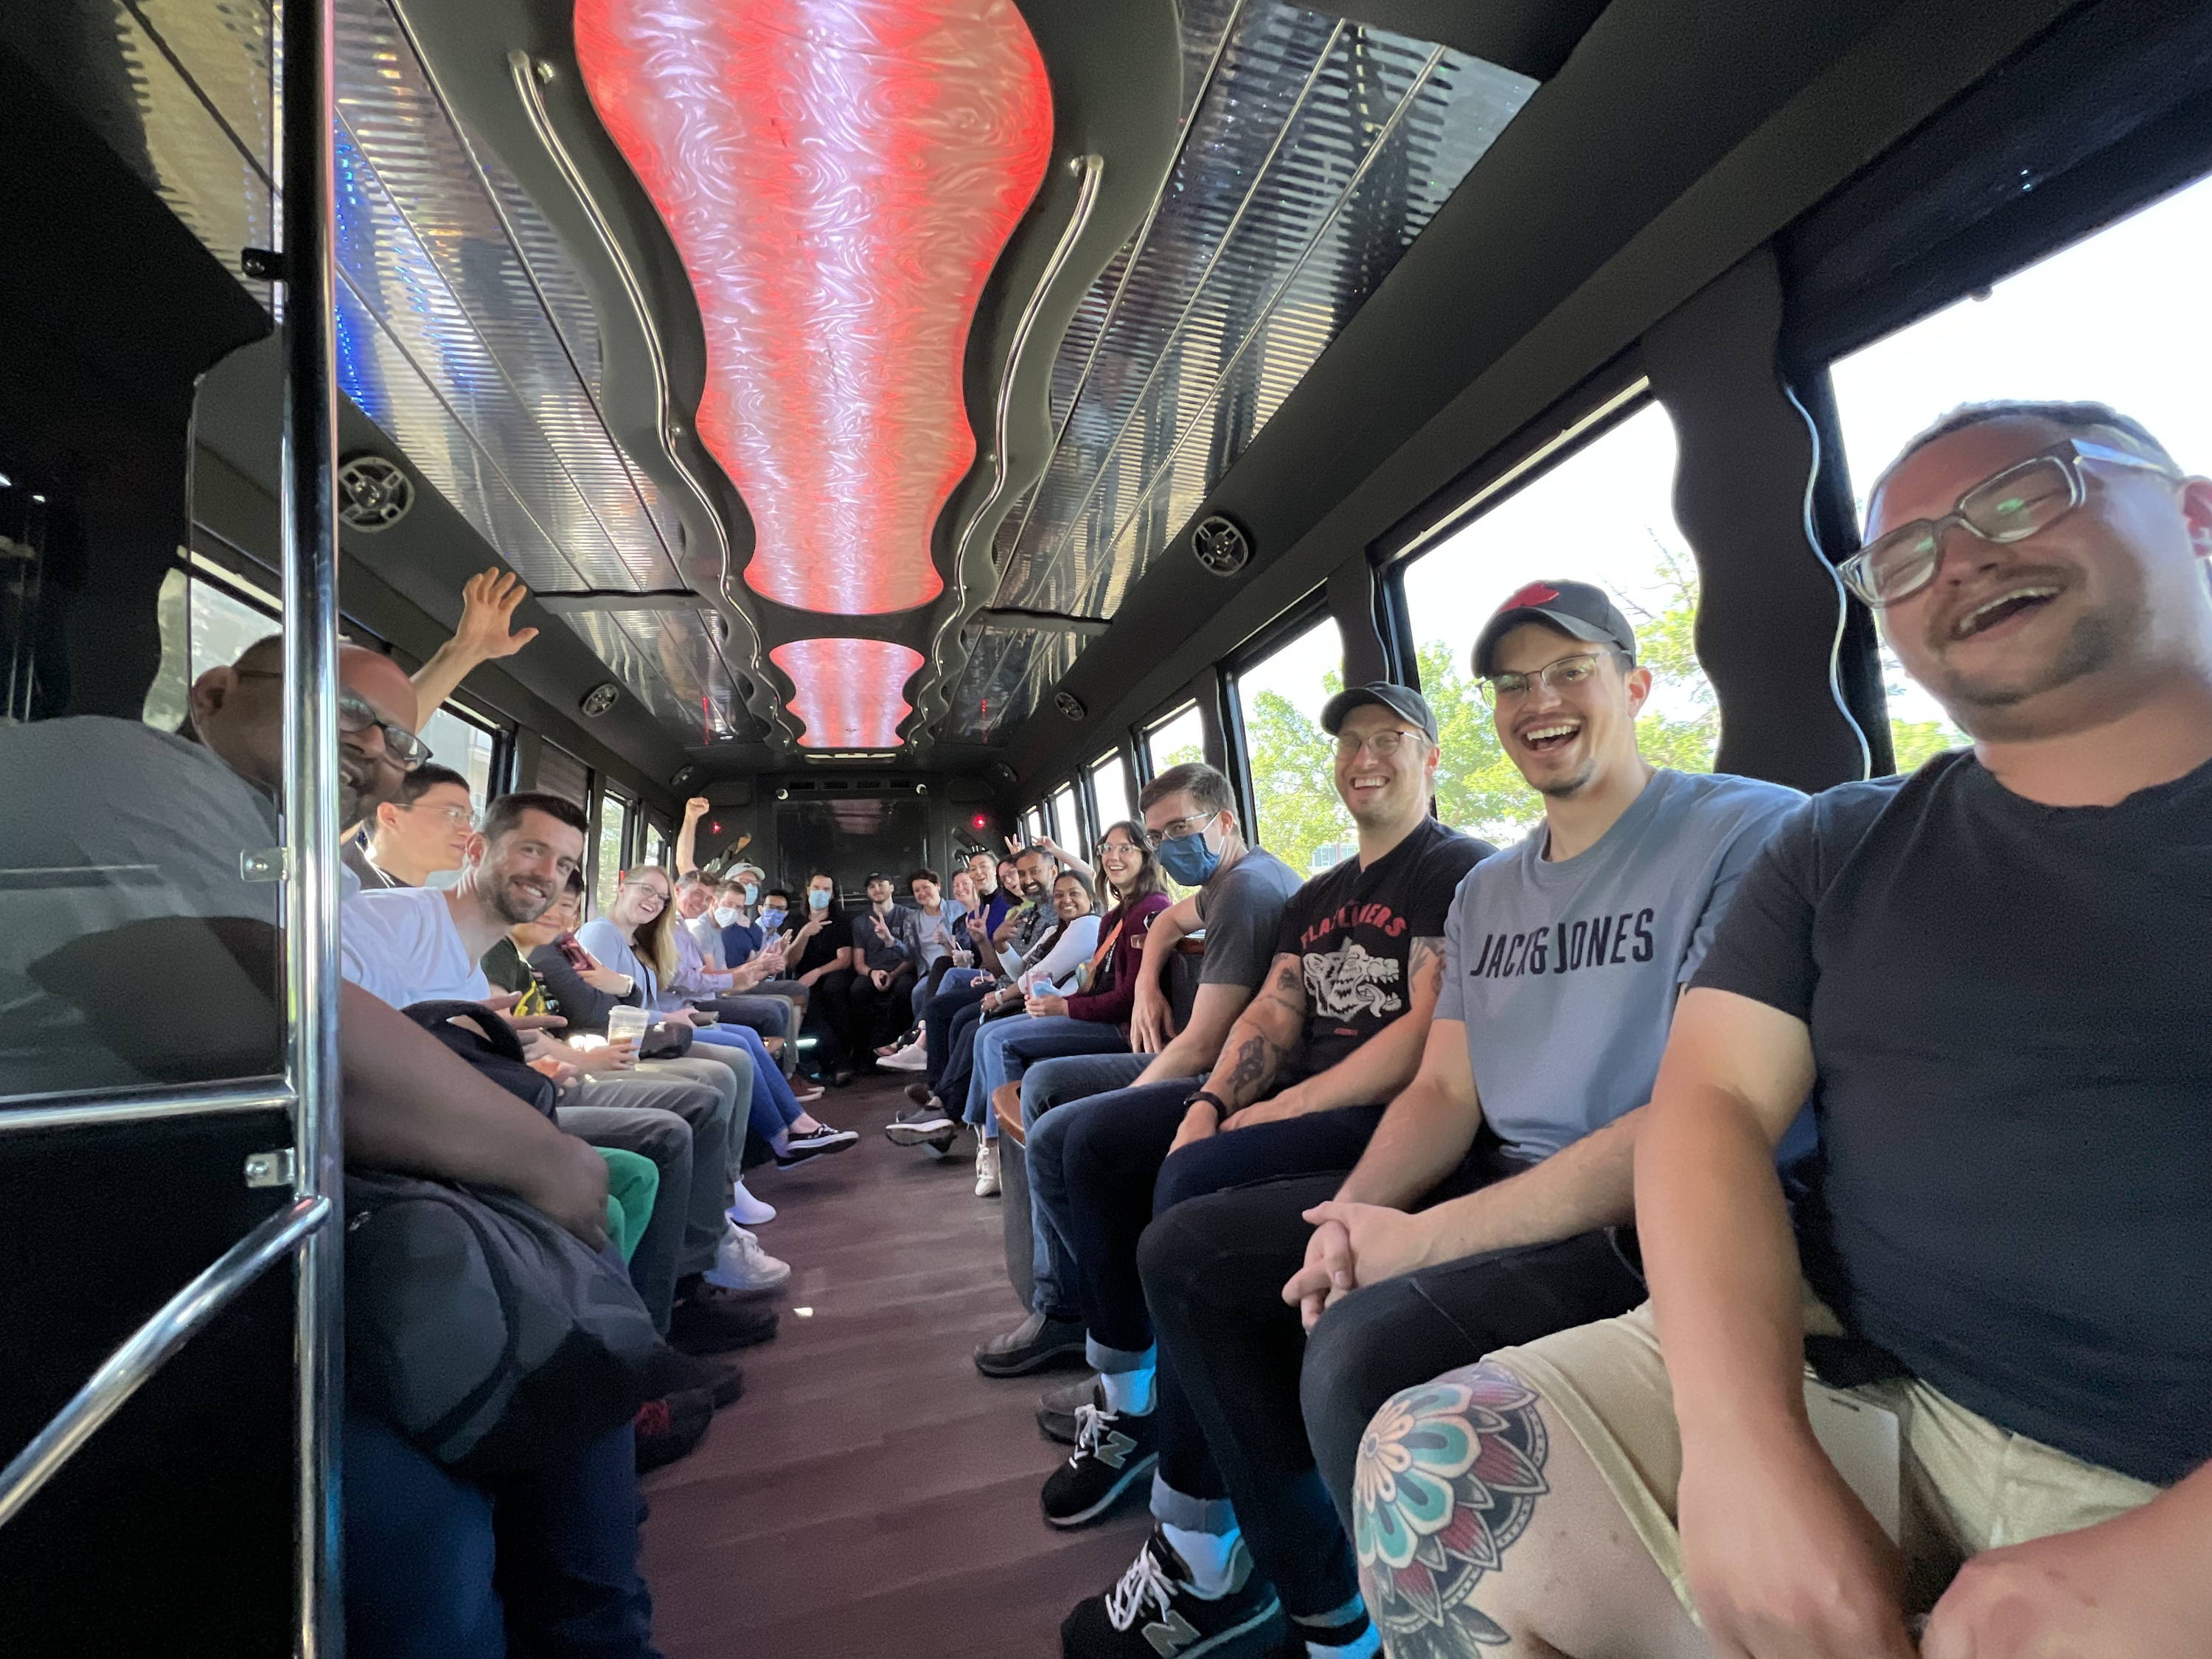 Future Fields team on a party bus, July 2022.